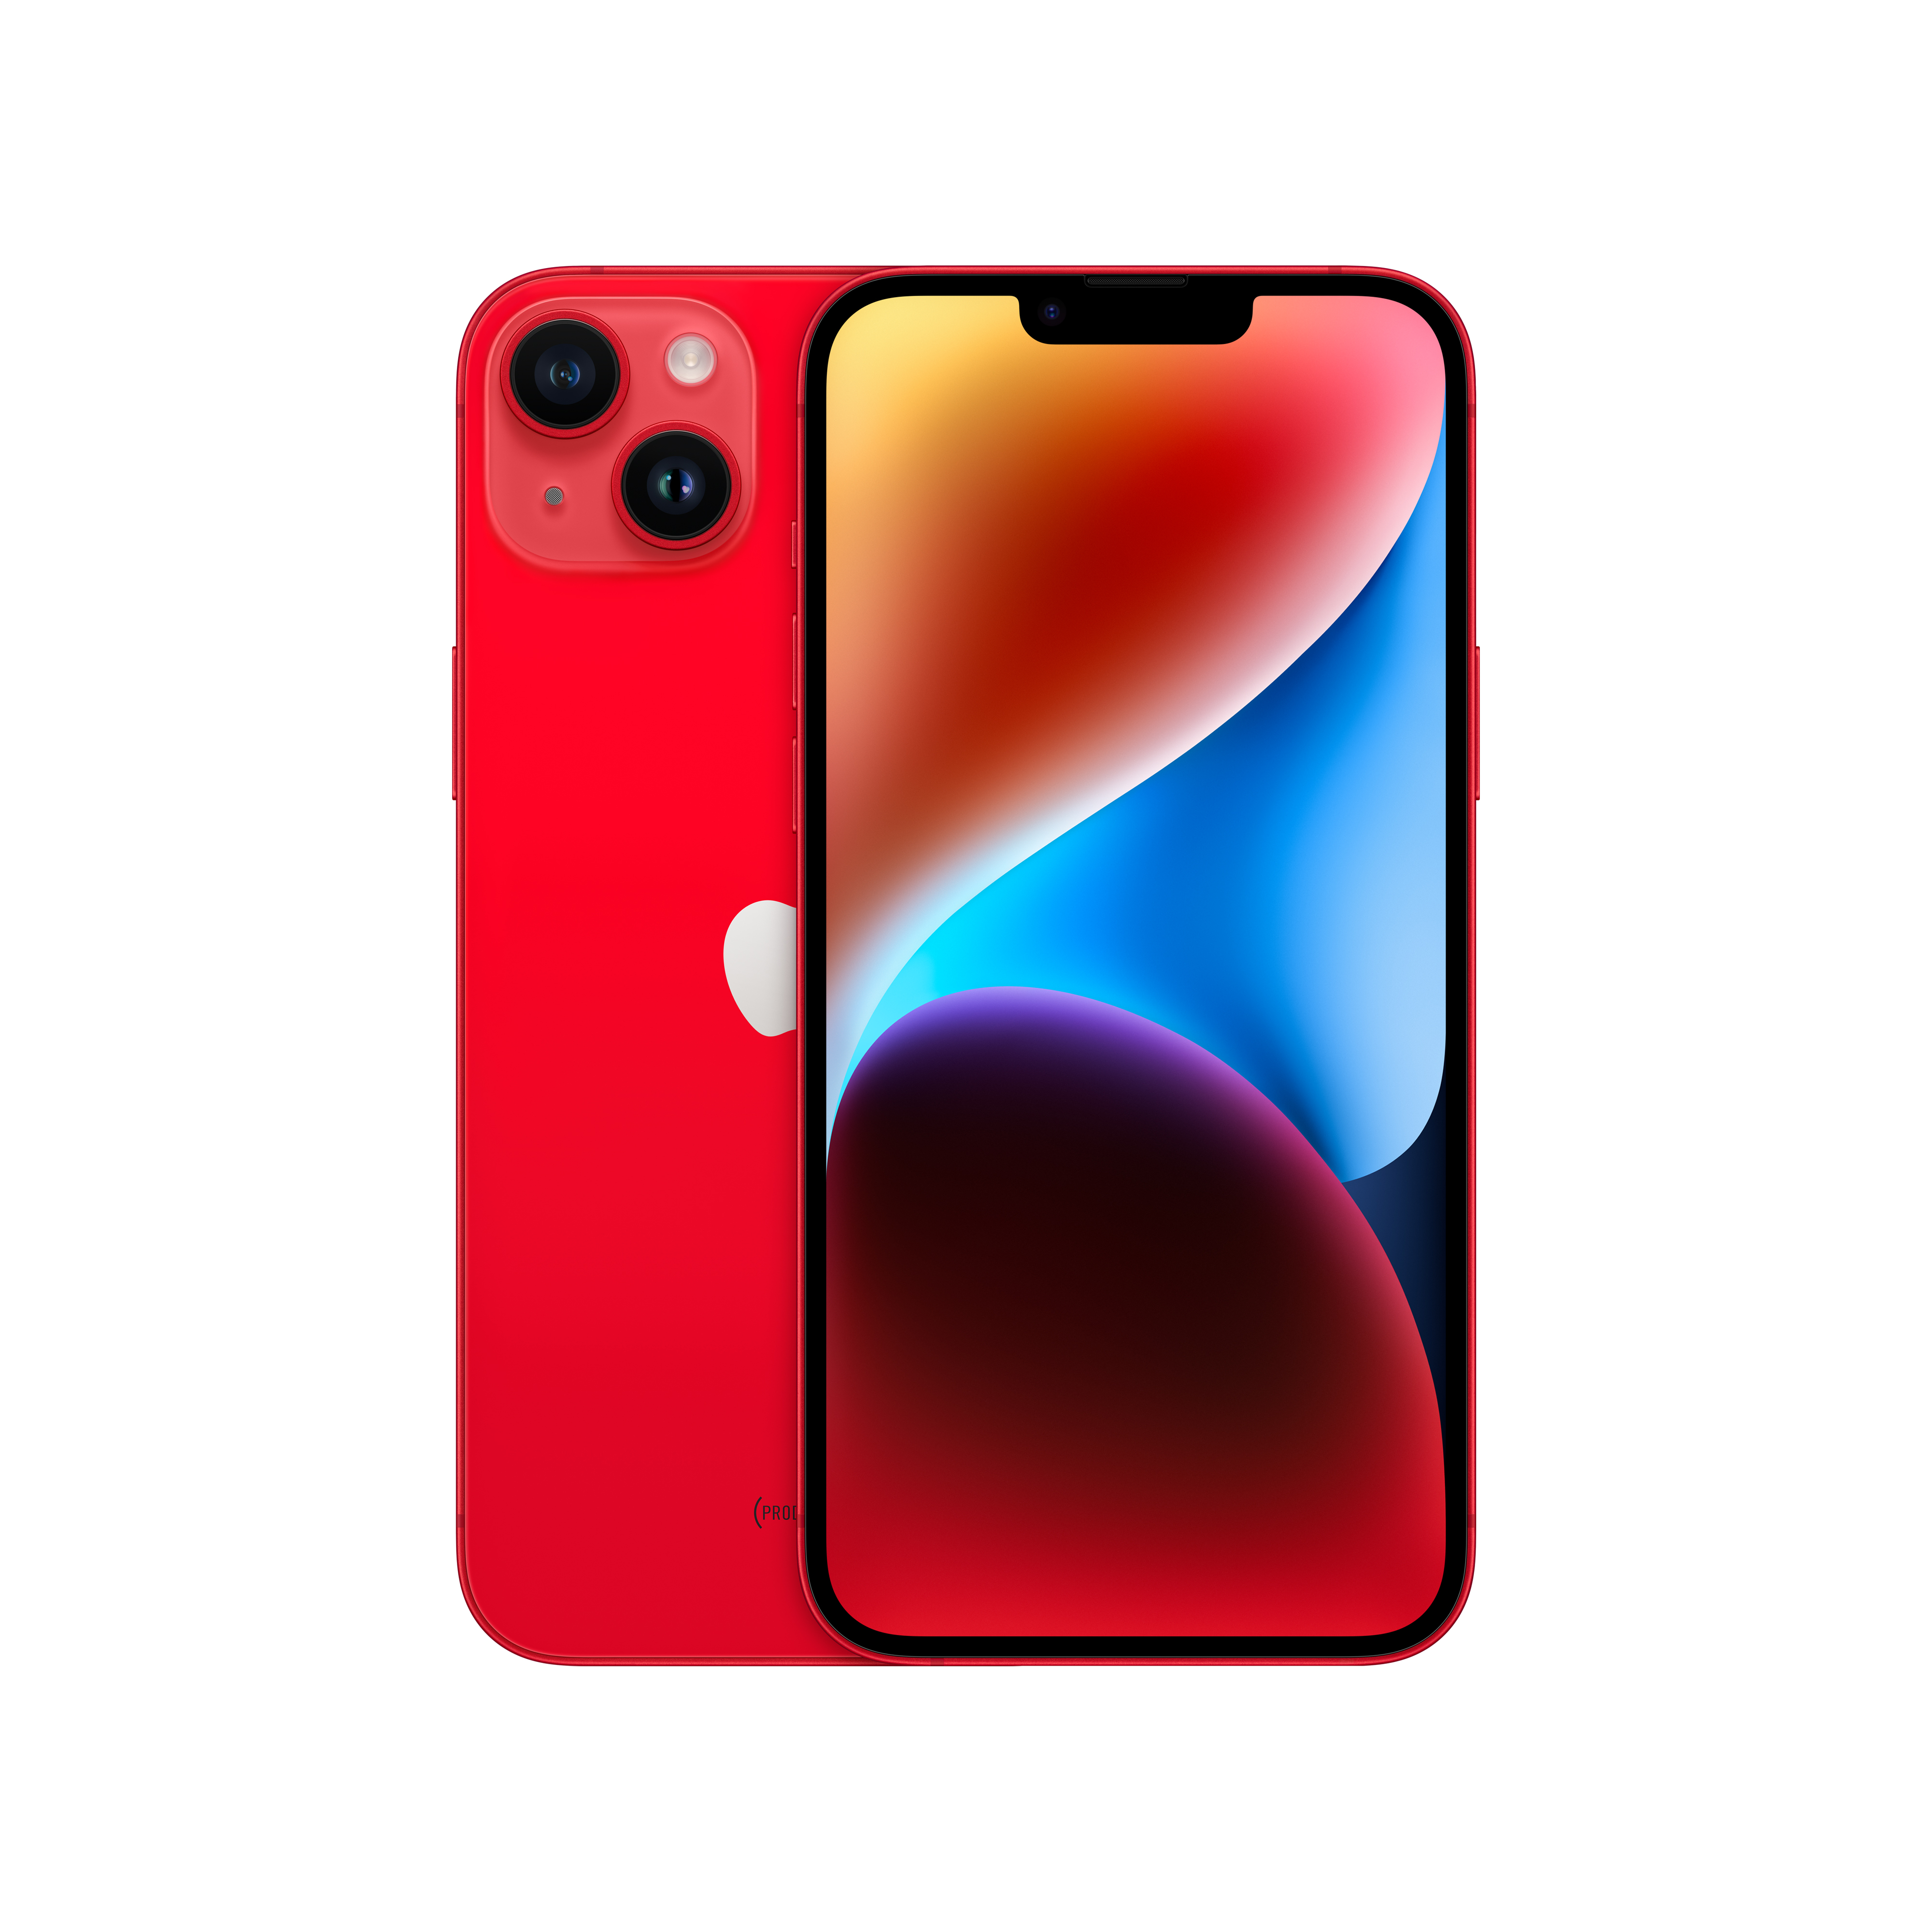 Apple iPhone 14 plus (3L283HN/A) RED with 128GB, iOS 16, A15 Bionic chip, 6core CPU with 2 performance, 6.7 inch OLED display